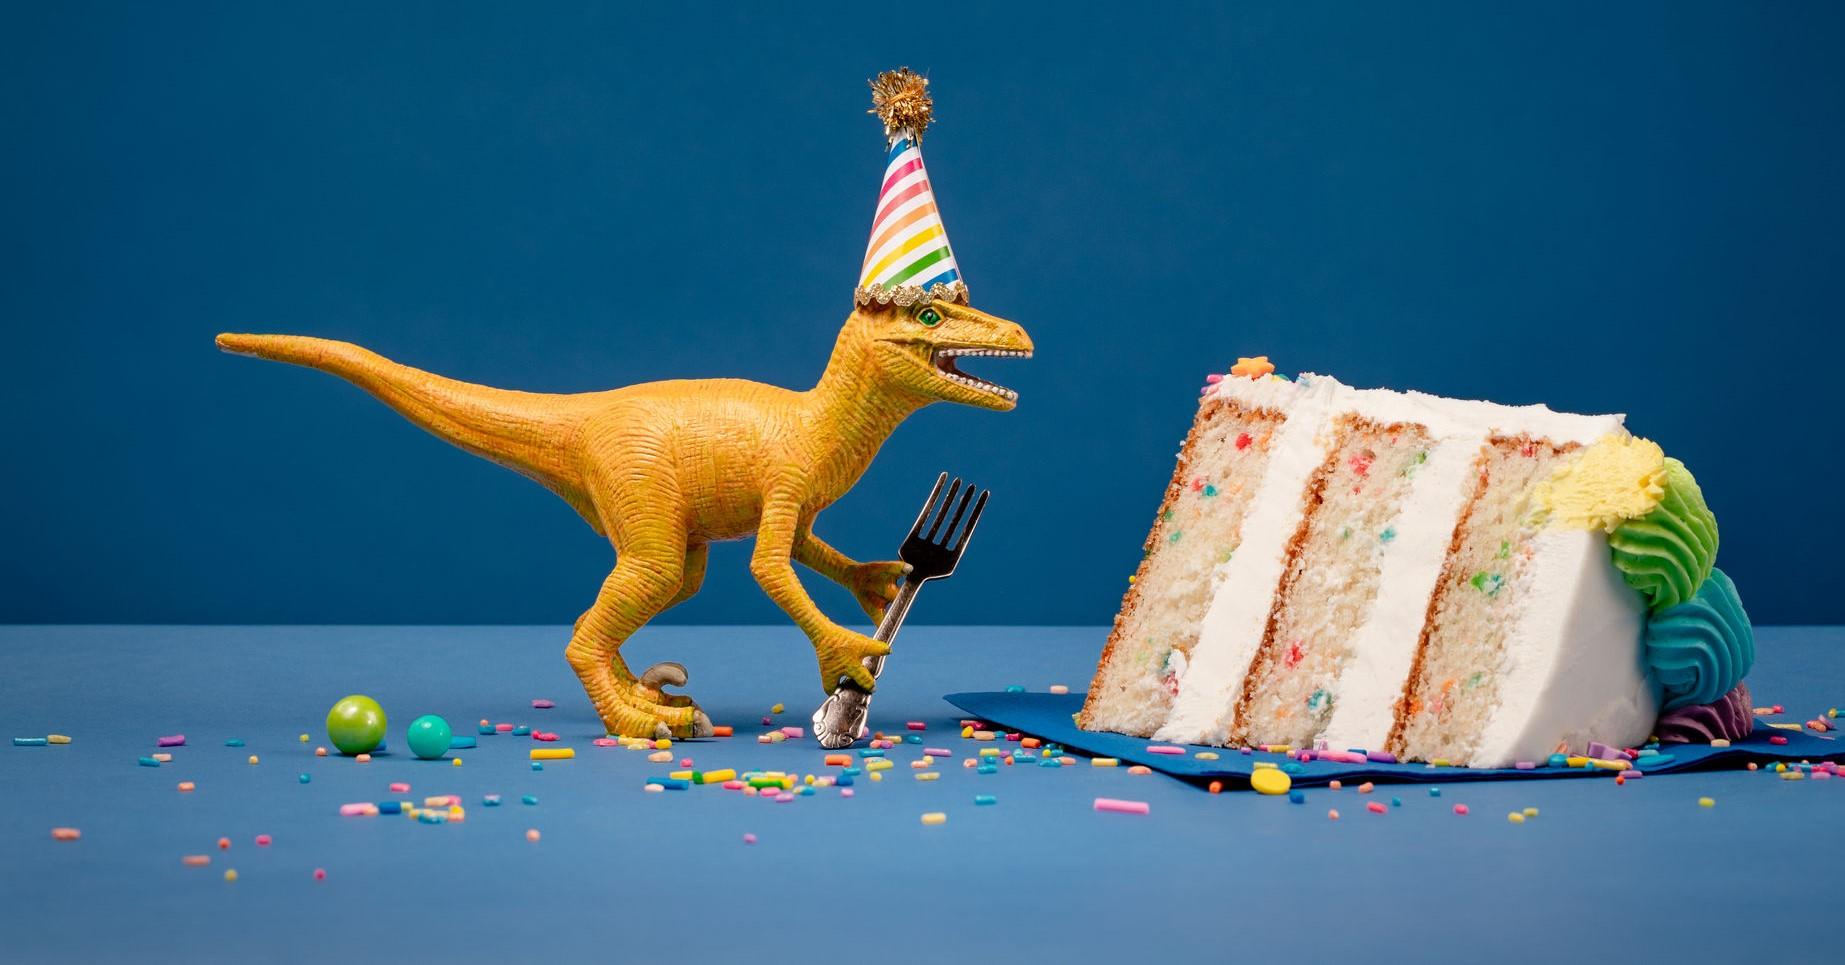 Toy Dinosaur holding a fork next to a slice of birthday confection on a undecorous background.